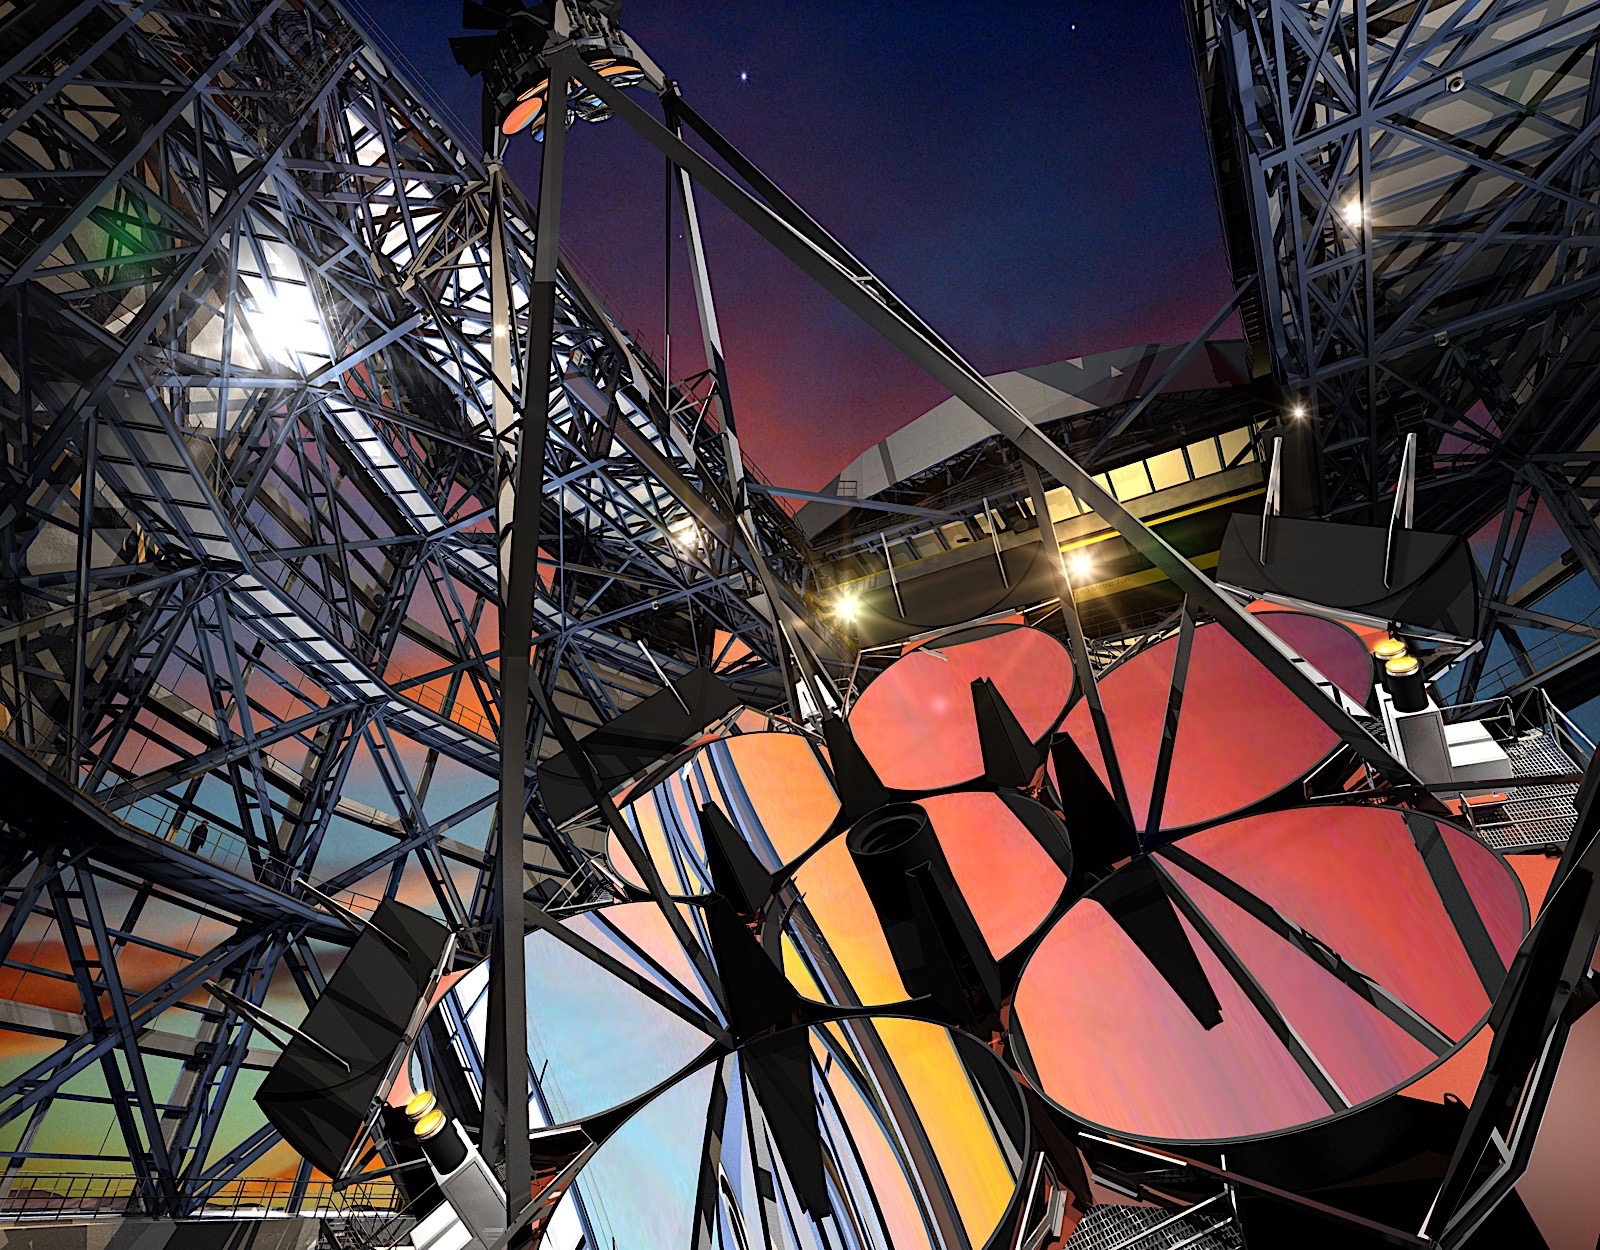 The world's largest telescope will unlock the universe's oldest secrets | DeviceDaily.com